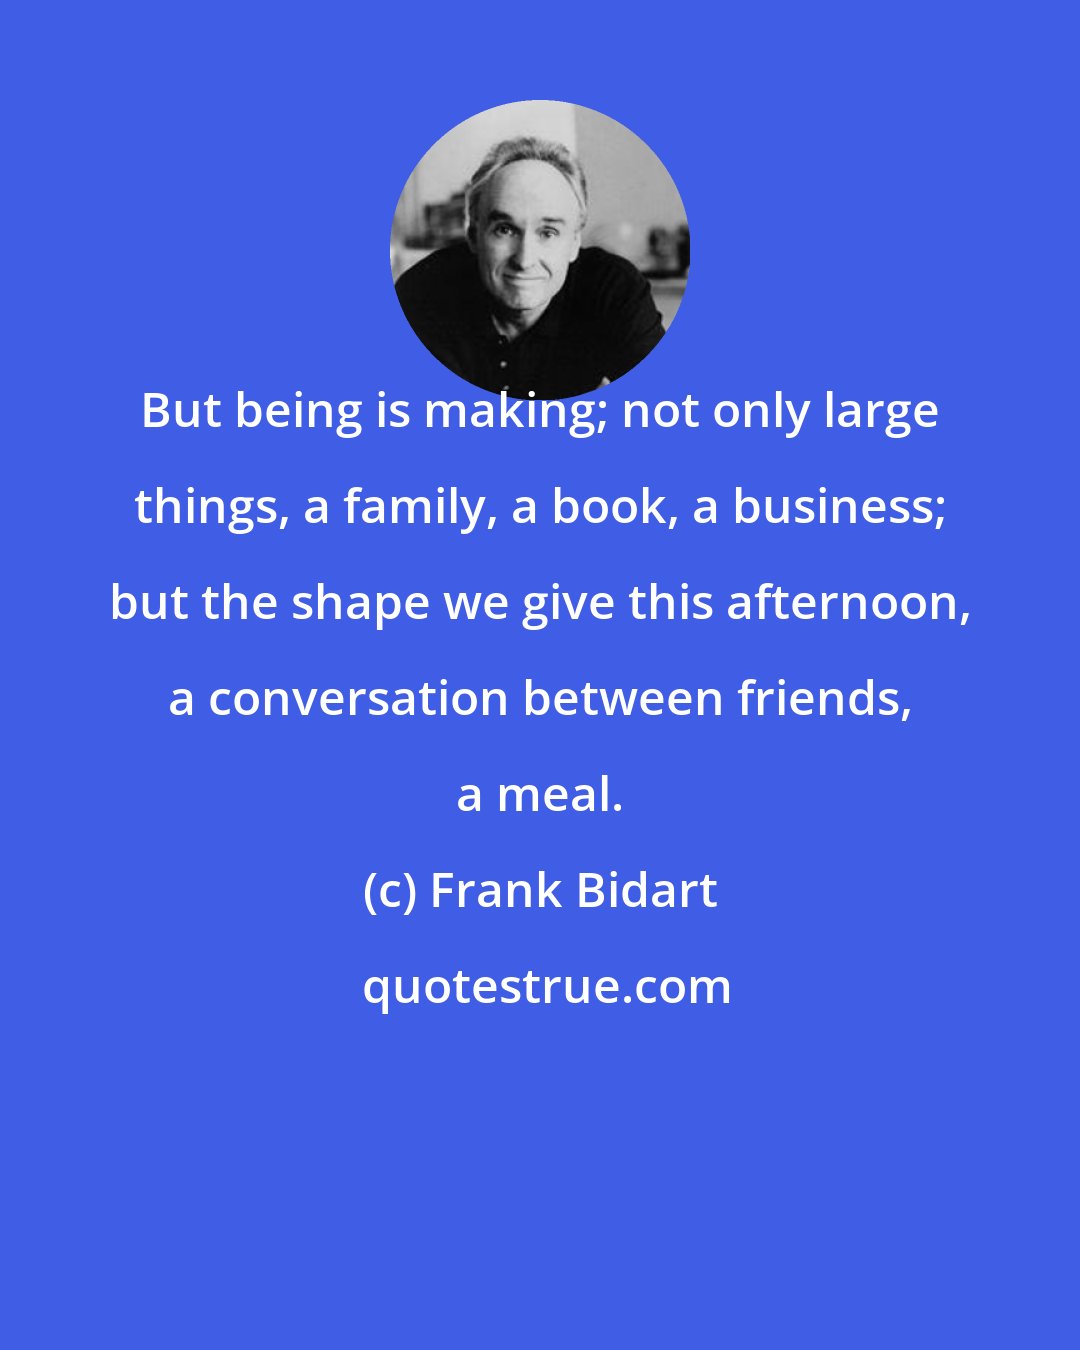 Frank Bidart: But being is making; not only large things, a family, a book, a business; but the shape we give this afternoon, a conversation between friends, a meal.